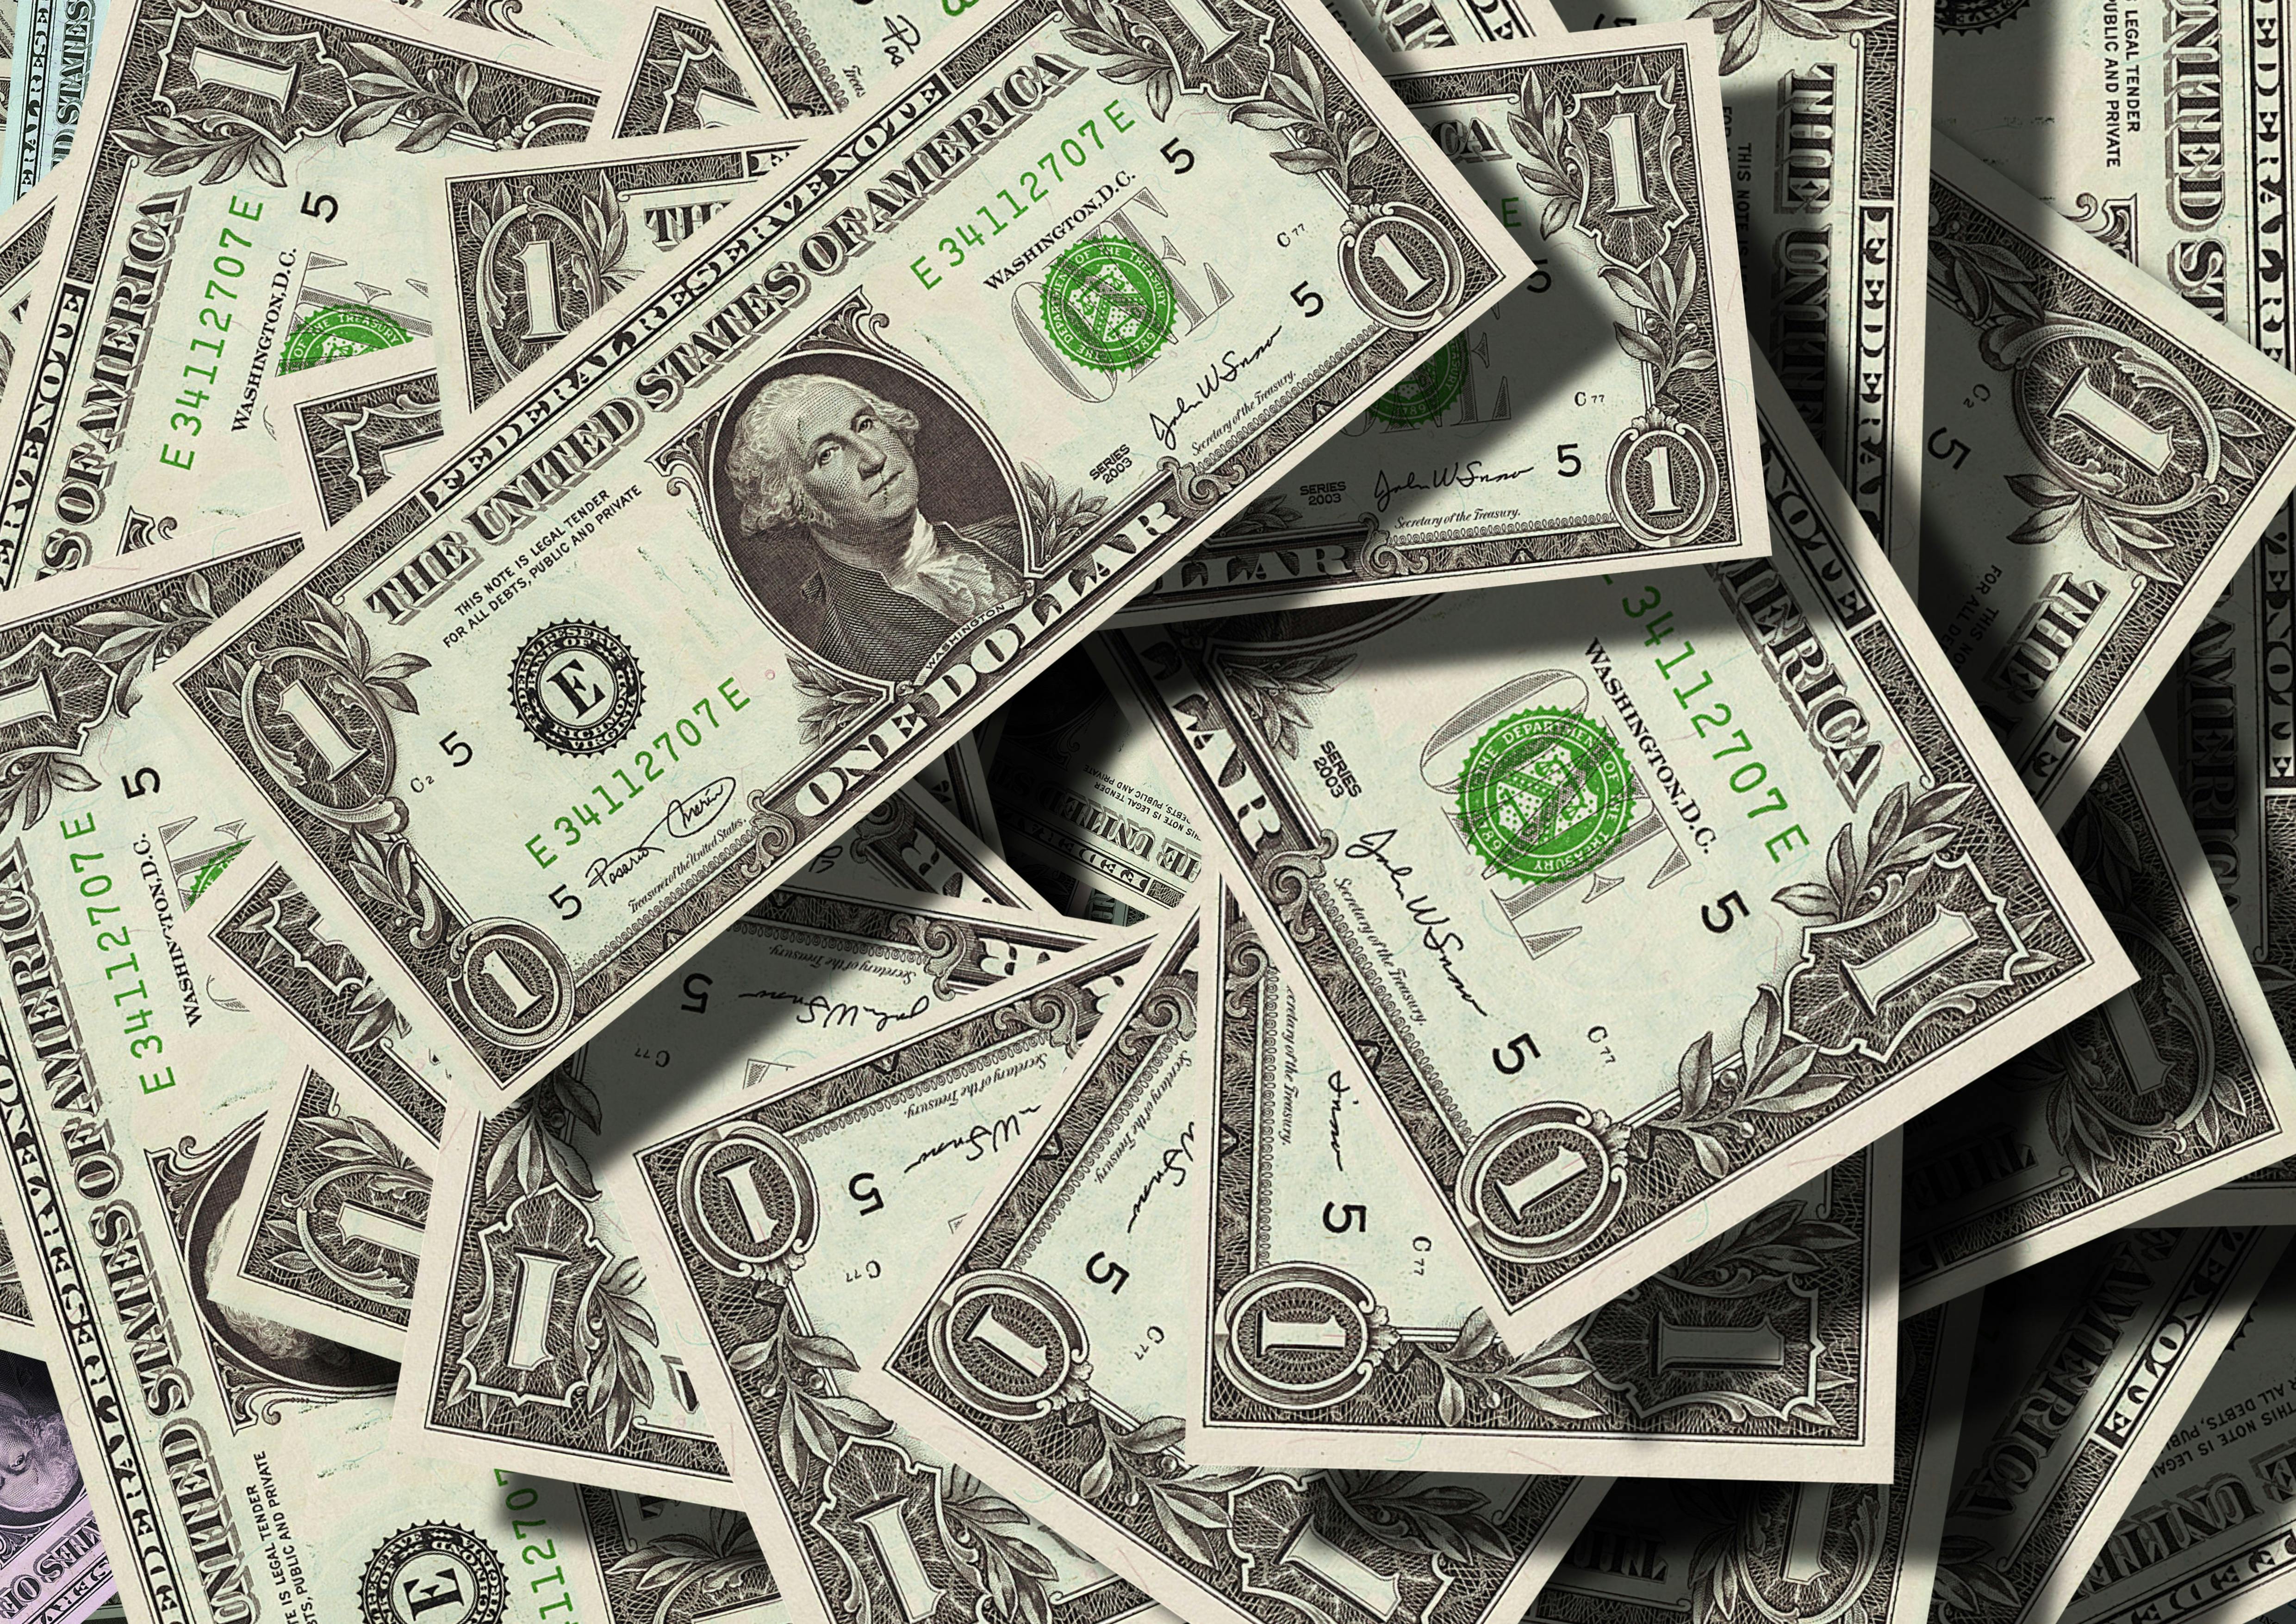 A pile of one dollar bills | Source: Pexels